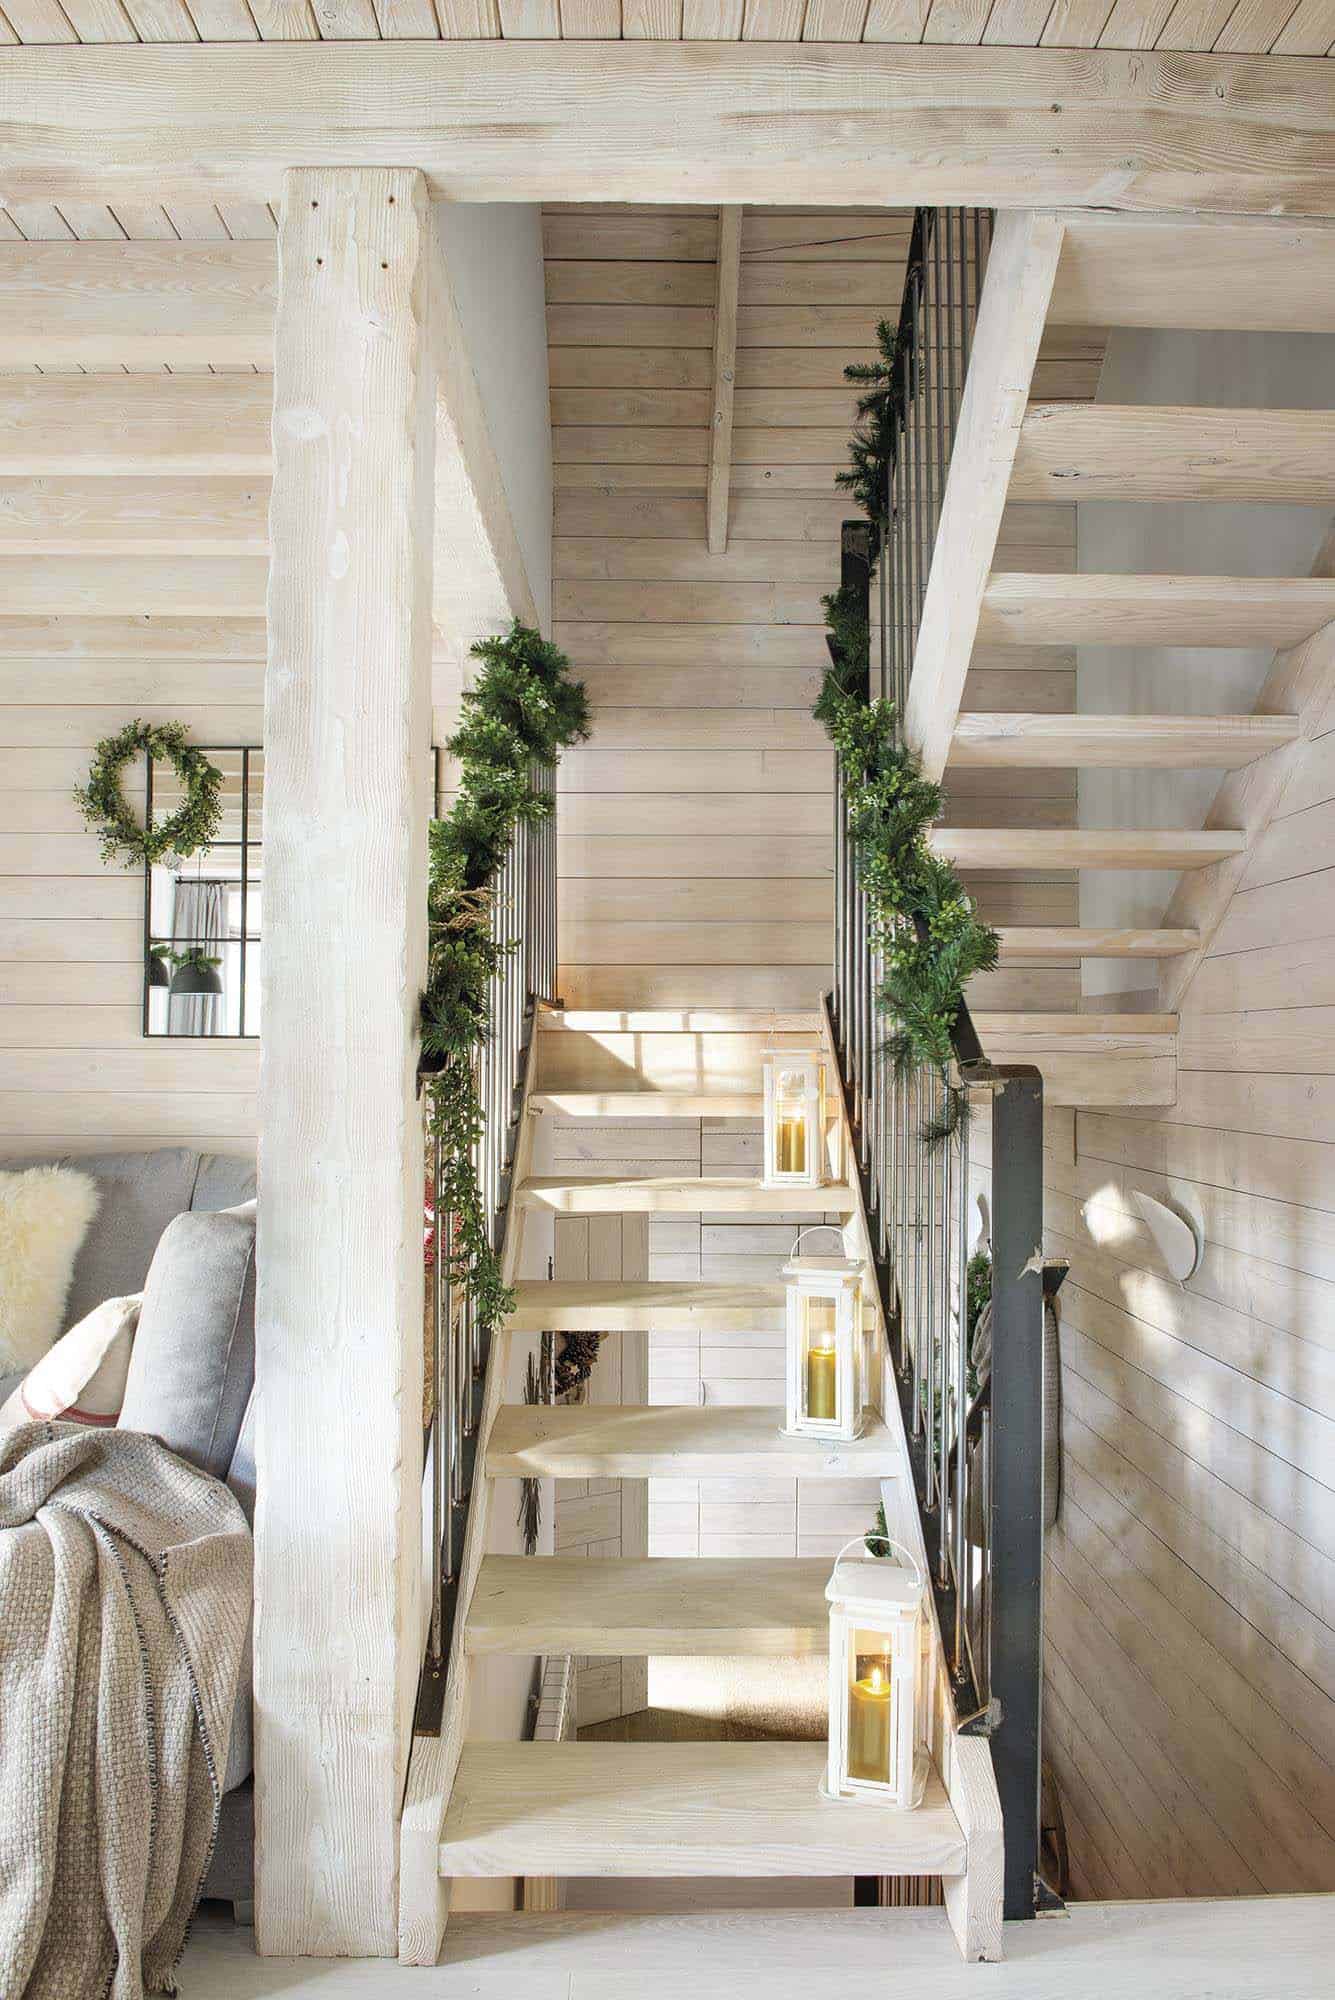 christmas-decorated-staircase